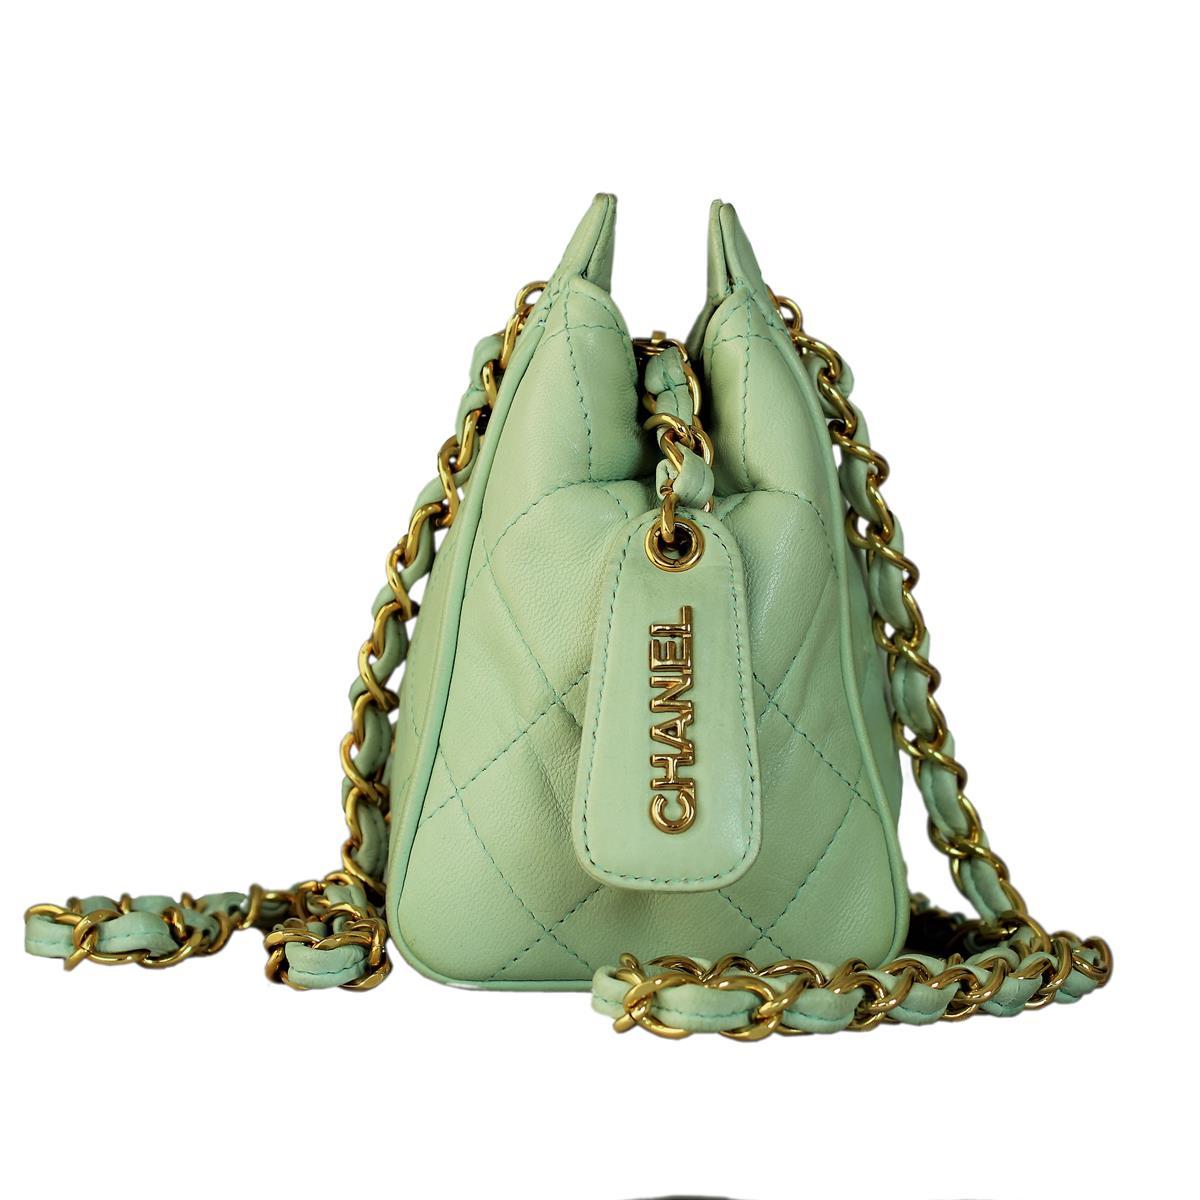 Very rare and prestigious Chanel mini bag
Vintage from the 90s
Matelassé leather
Light mint green color
Golden chain
Two internal pockets, one with zip
Cm 15 x 14 x 9 (5.9 x 5.5 x 3.54 inches)
Rare piece
Worldwide express shipping included in the